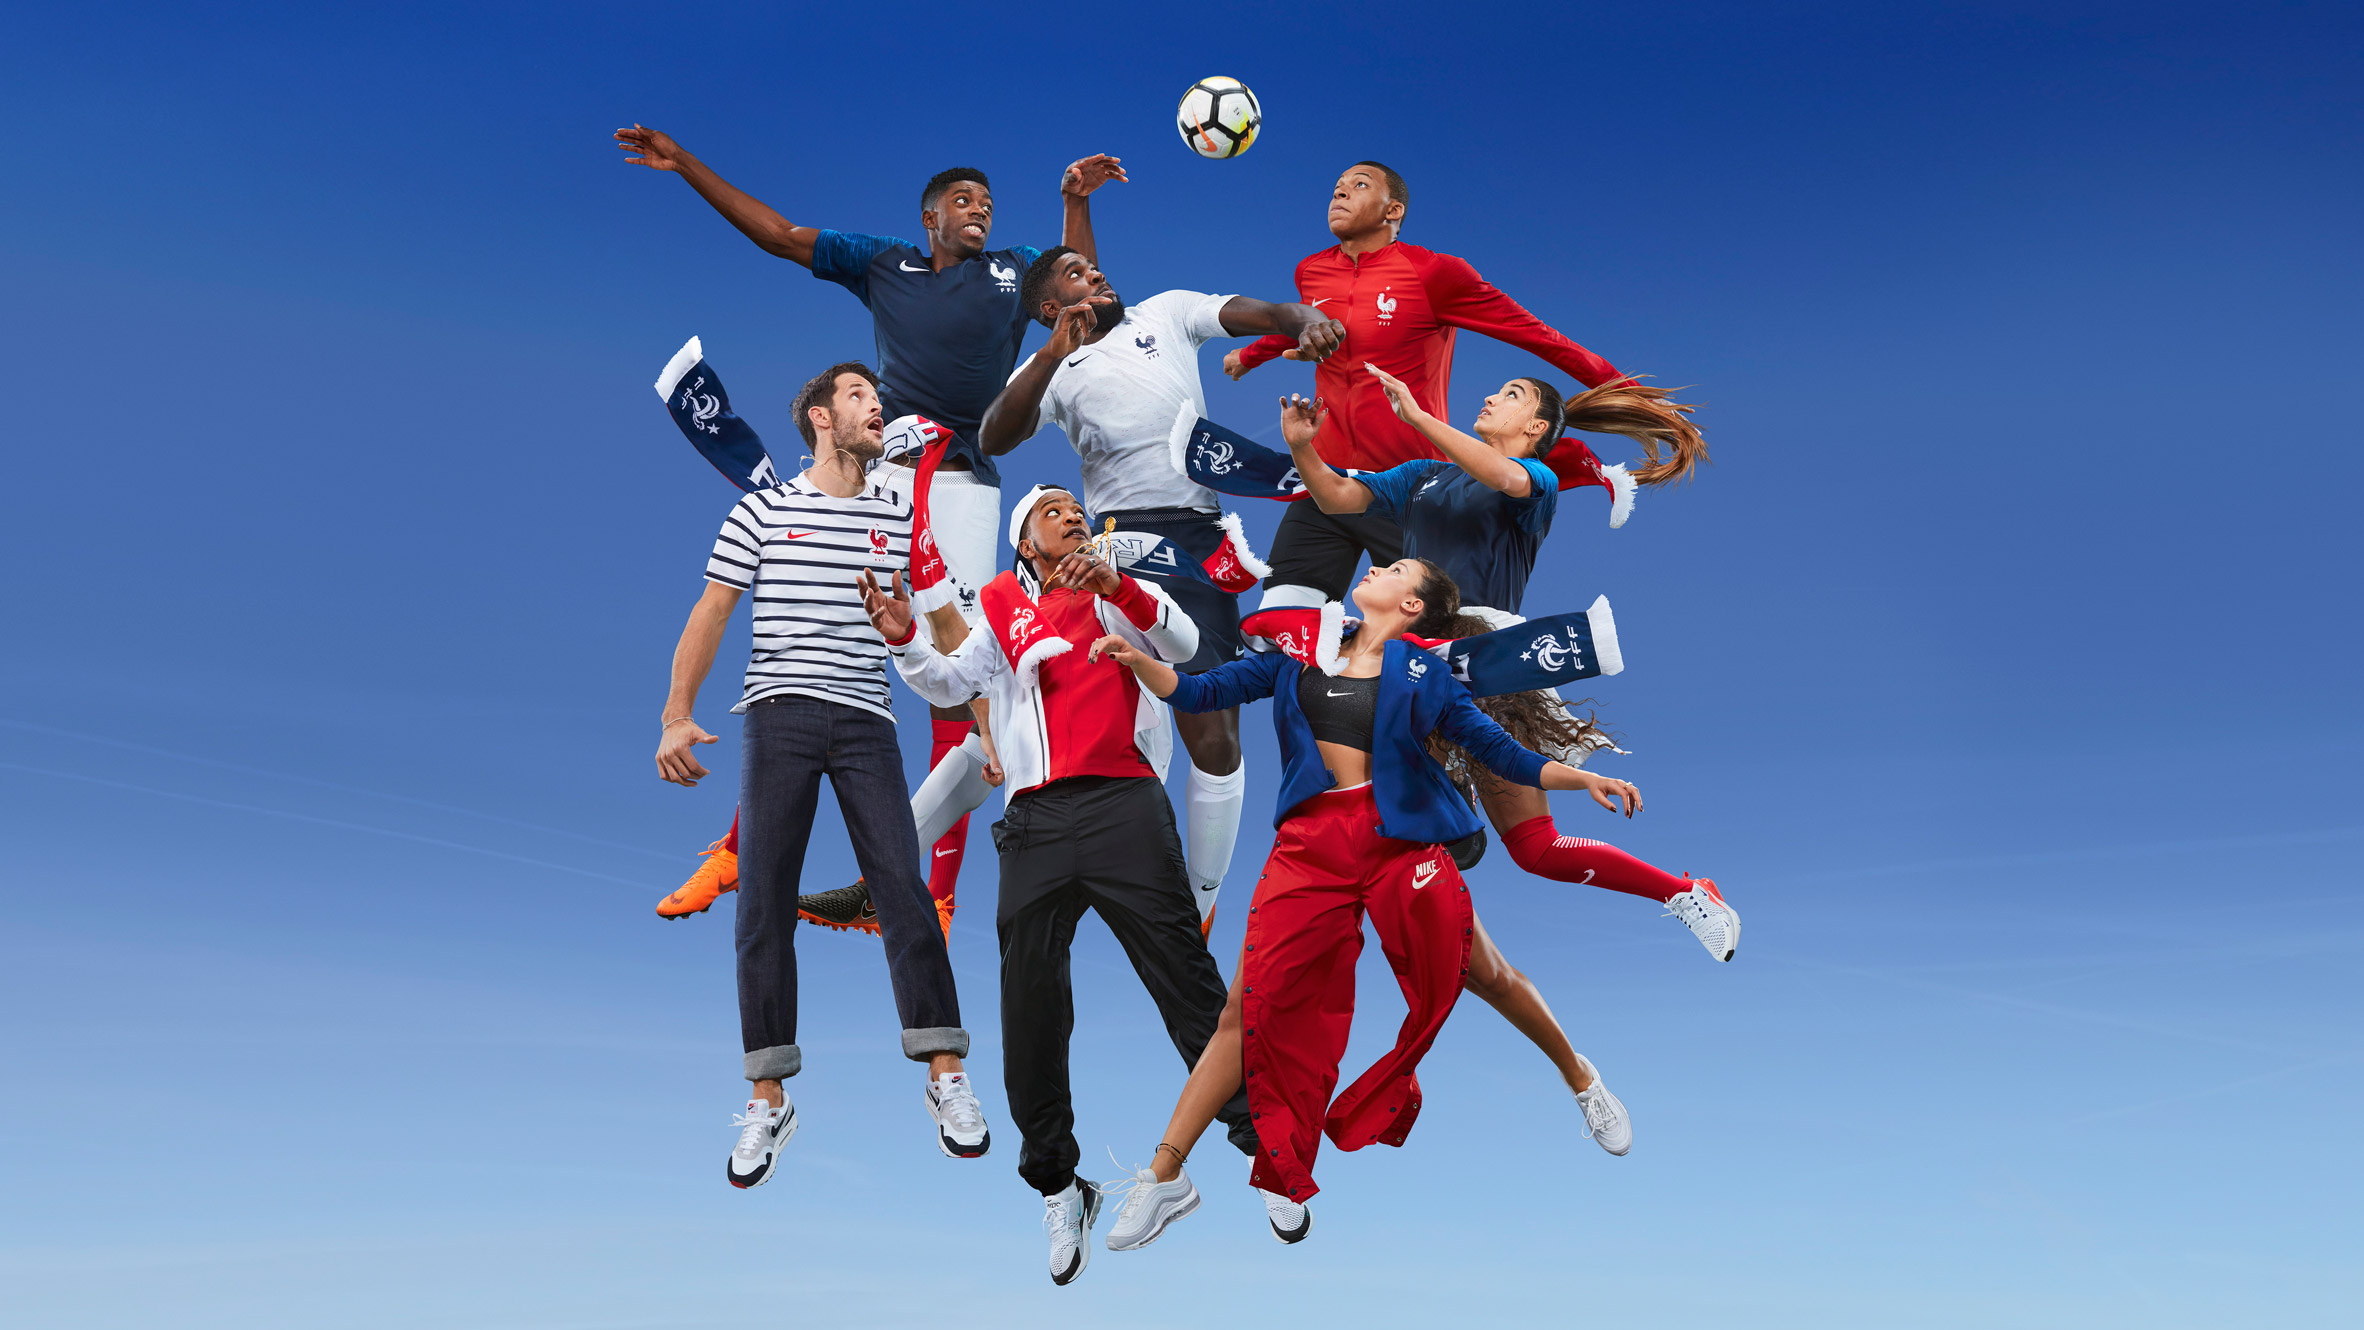 Nike's World Cup 2018 kits for France are designed to express